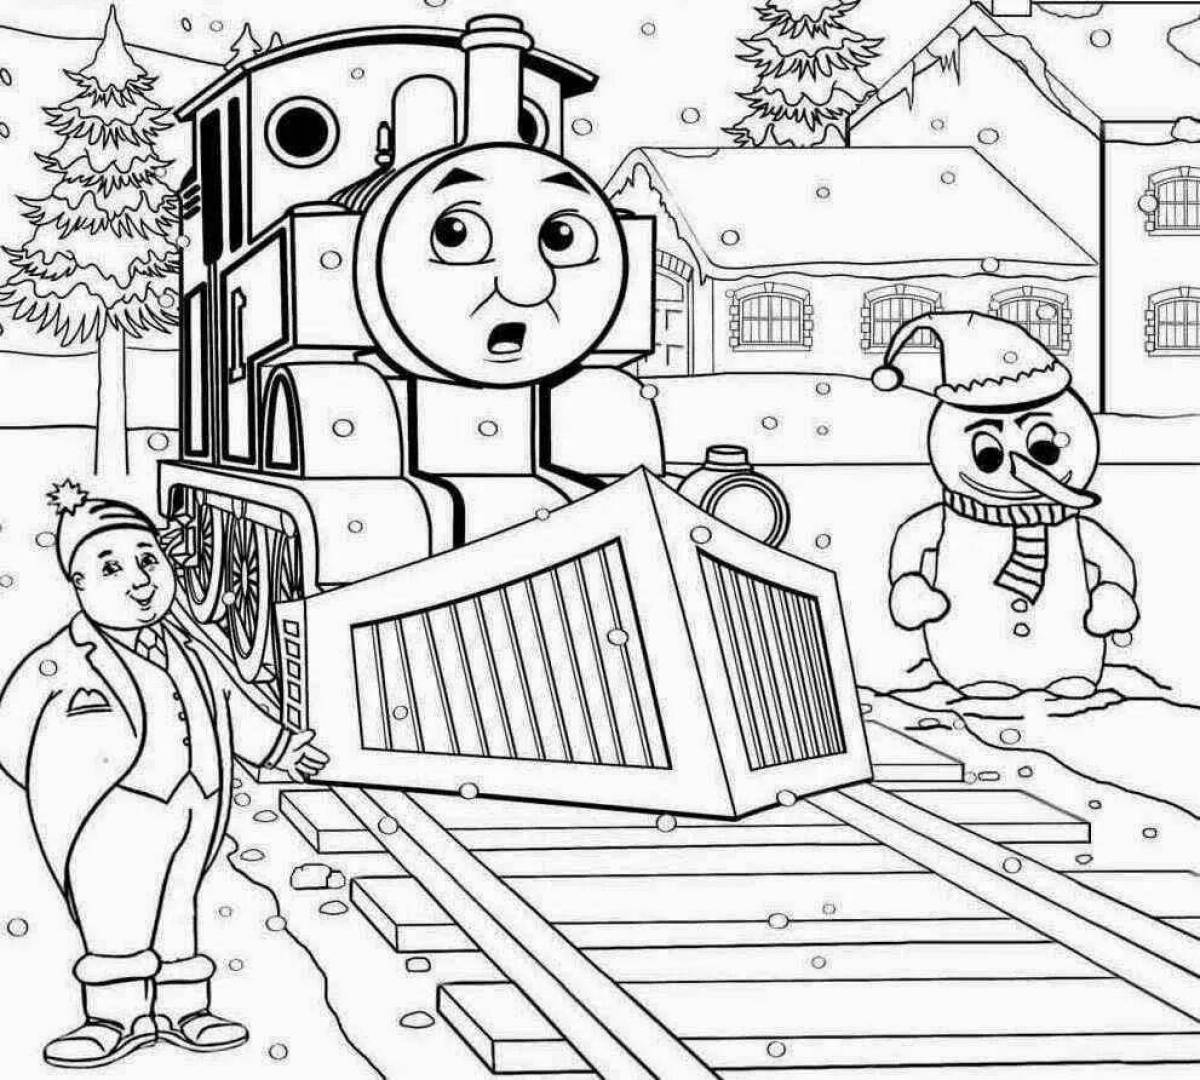 Thomas's exciting train coloring book